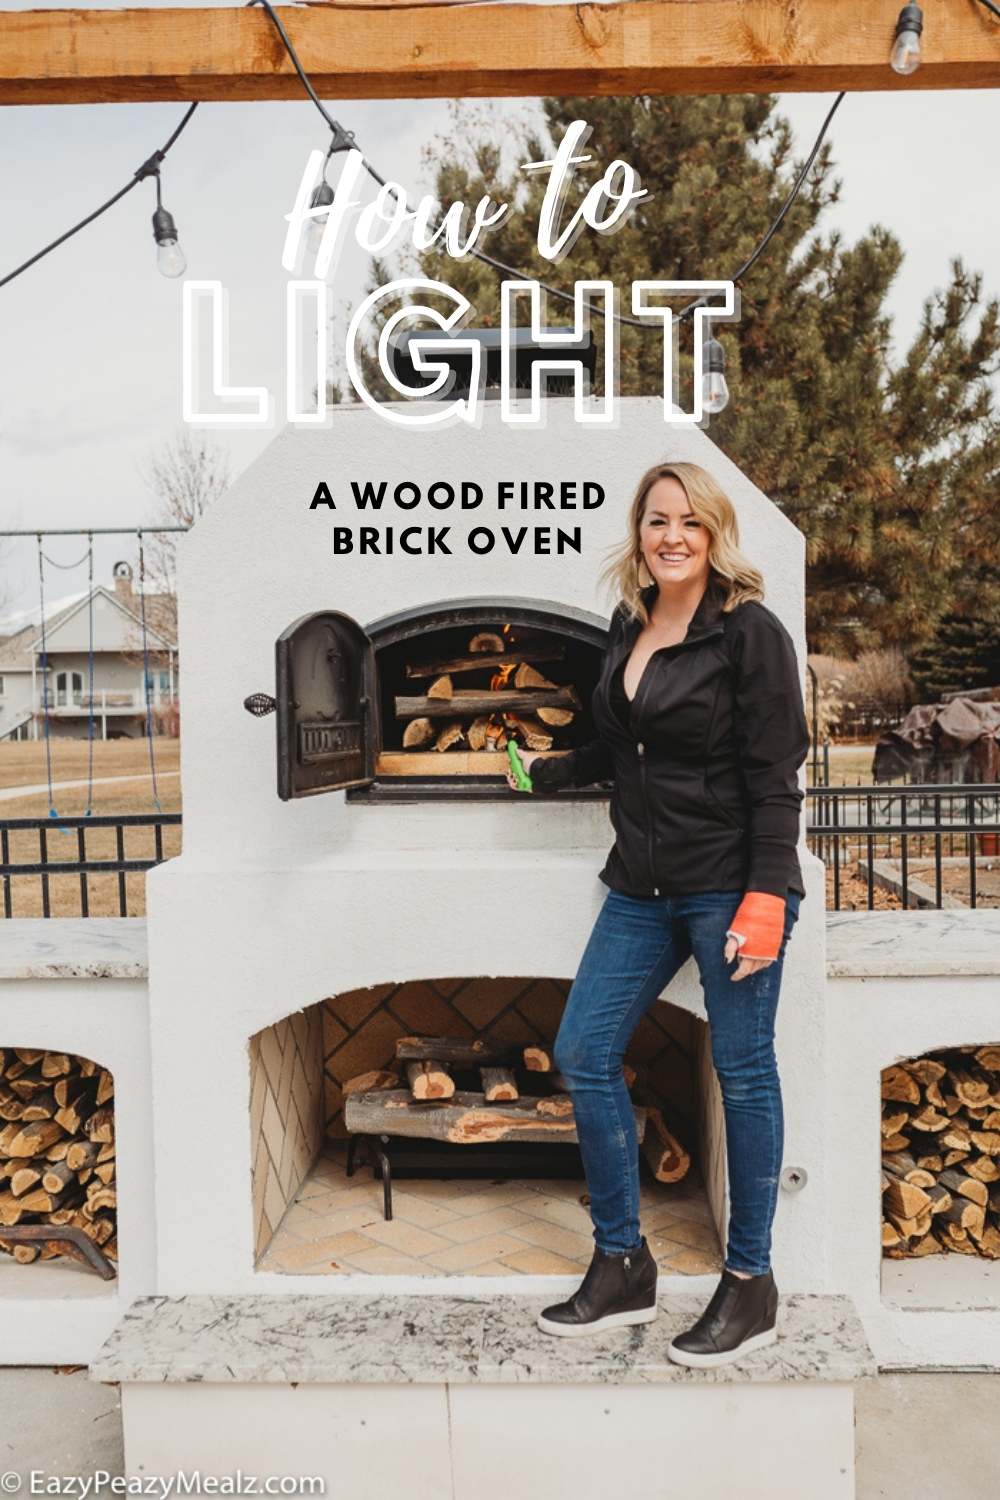 How to build a simple DIY wood-fired oven